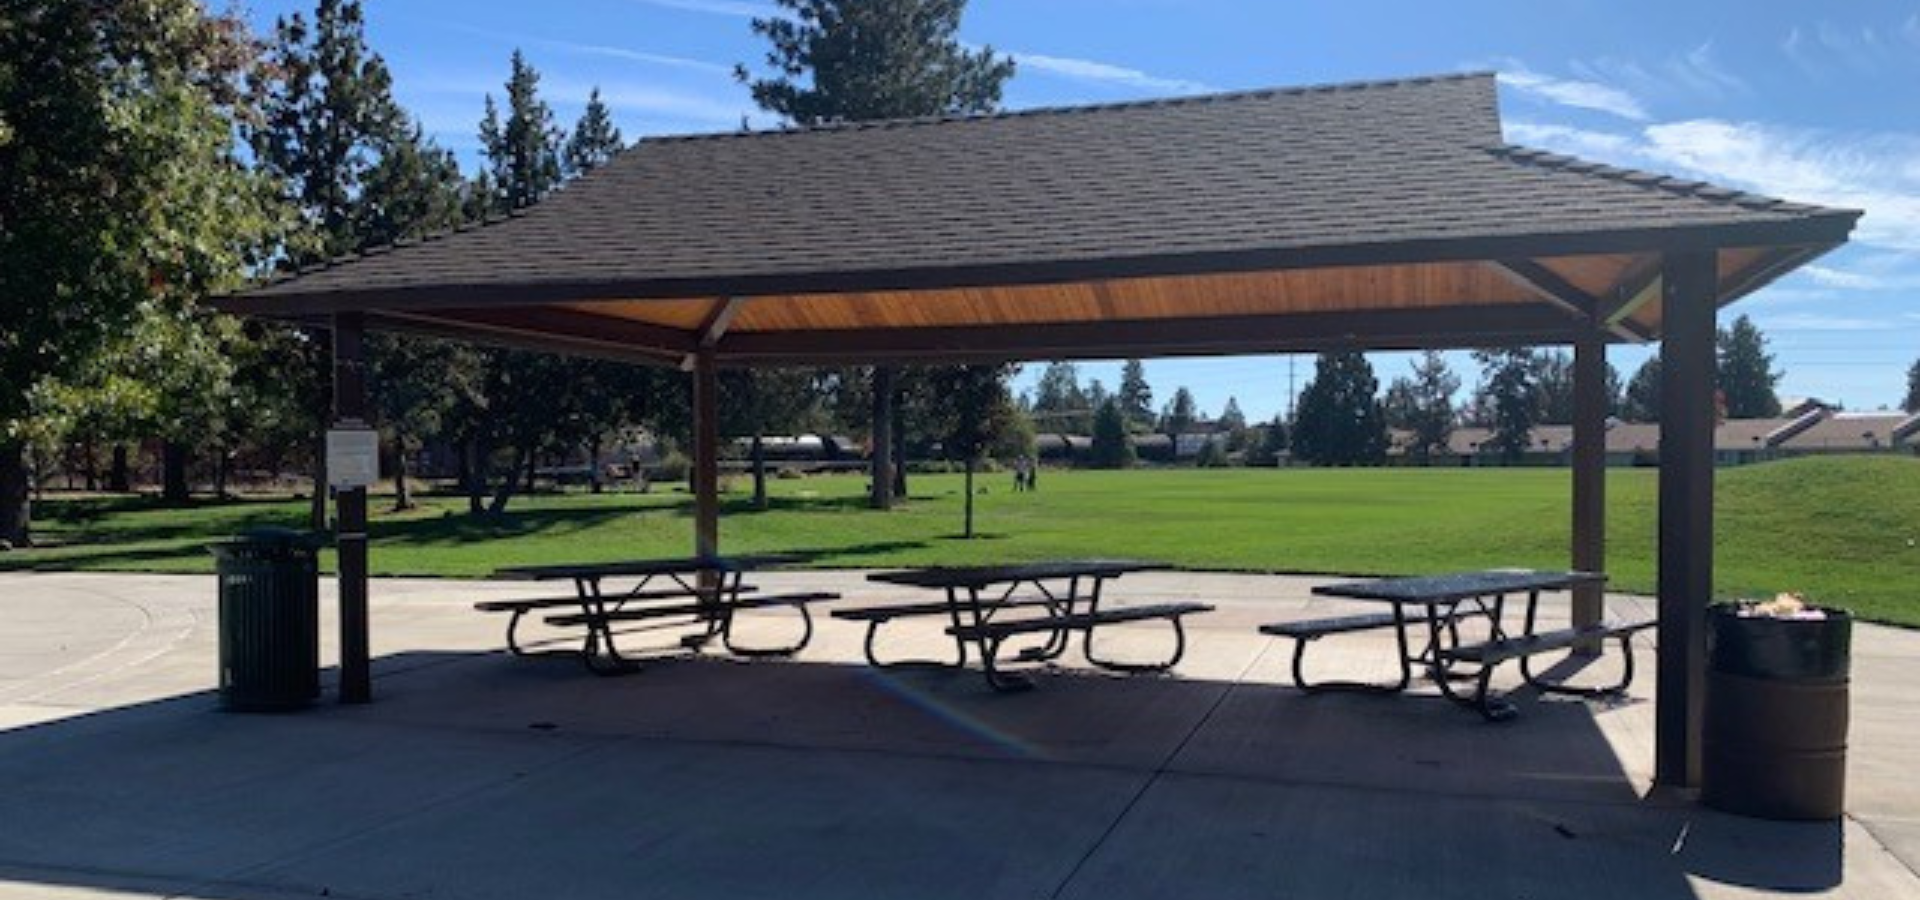 picnic shelter at Kiwanis park covering park benches in the shade with sunny green lawn in thebackground